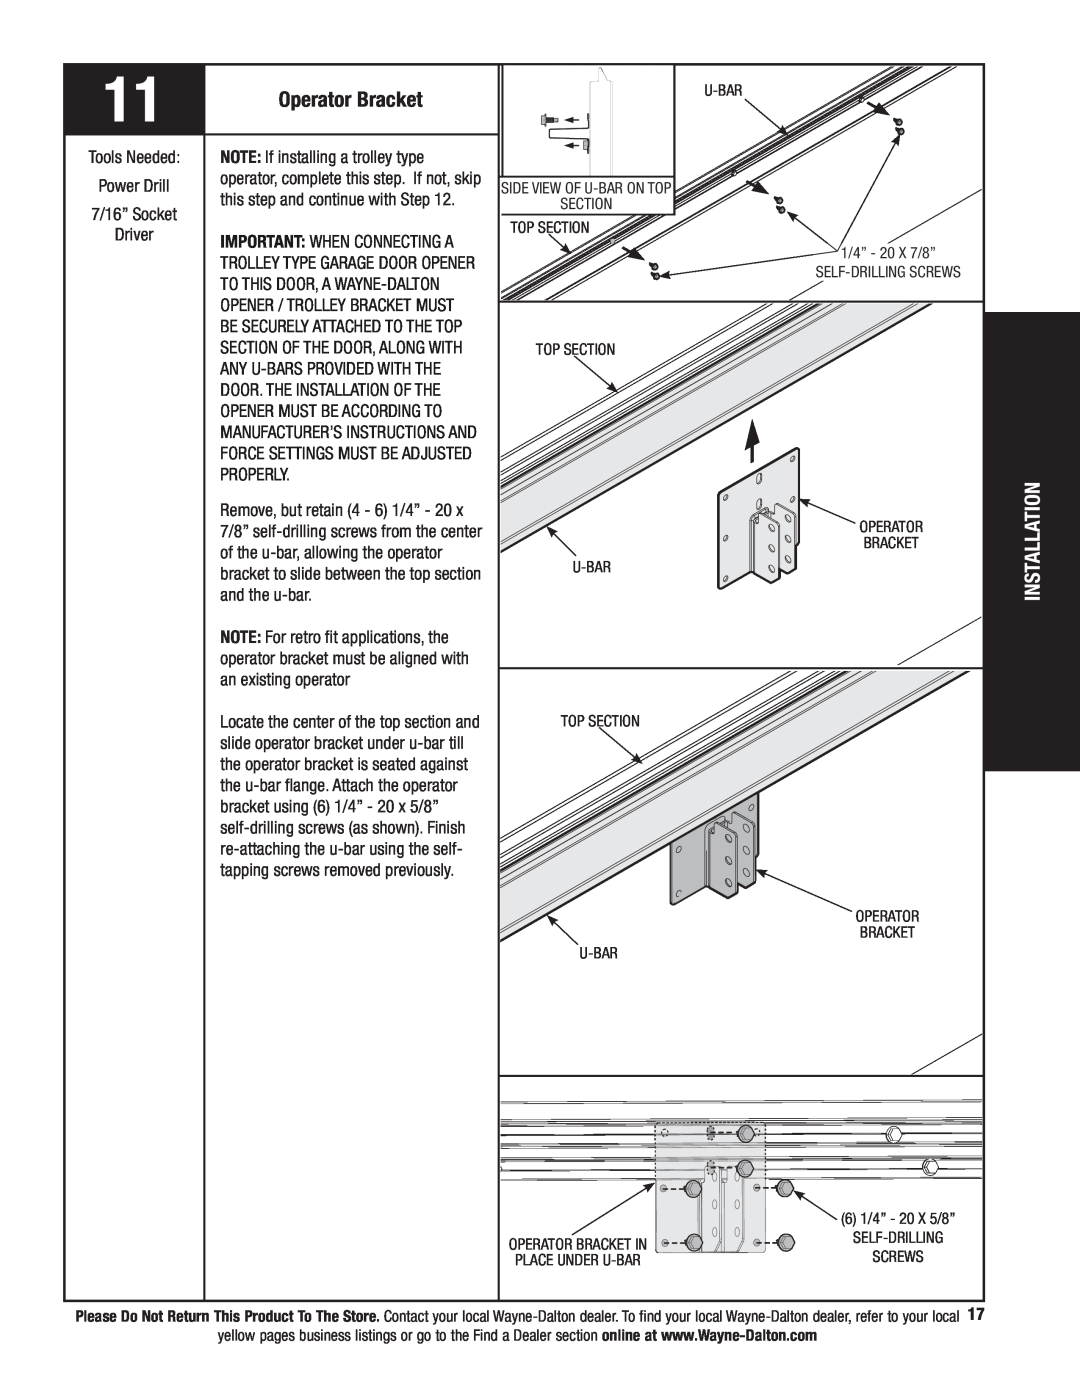 Wayne-Dalton 341458 Operator Bracket, Installation, NOTE: If installing a trolley type, this step and continue with Step 